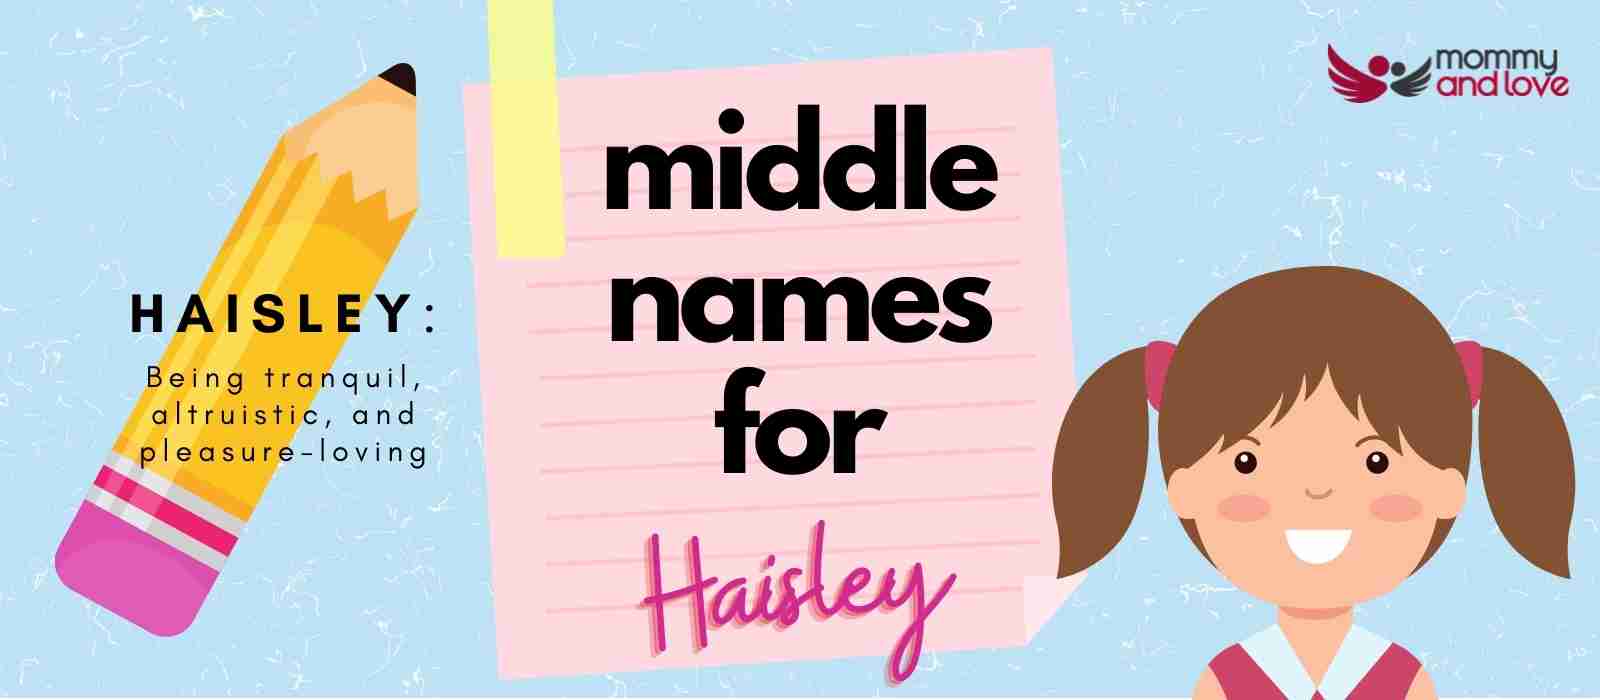 Middle Names for Haisley